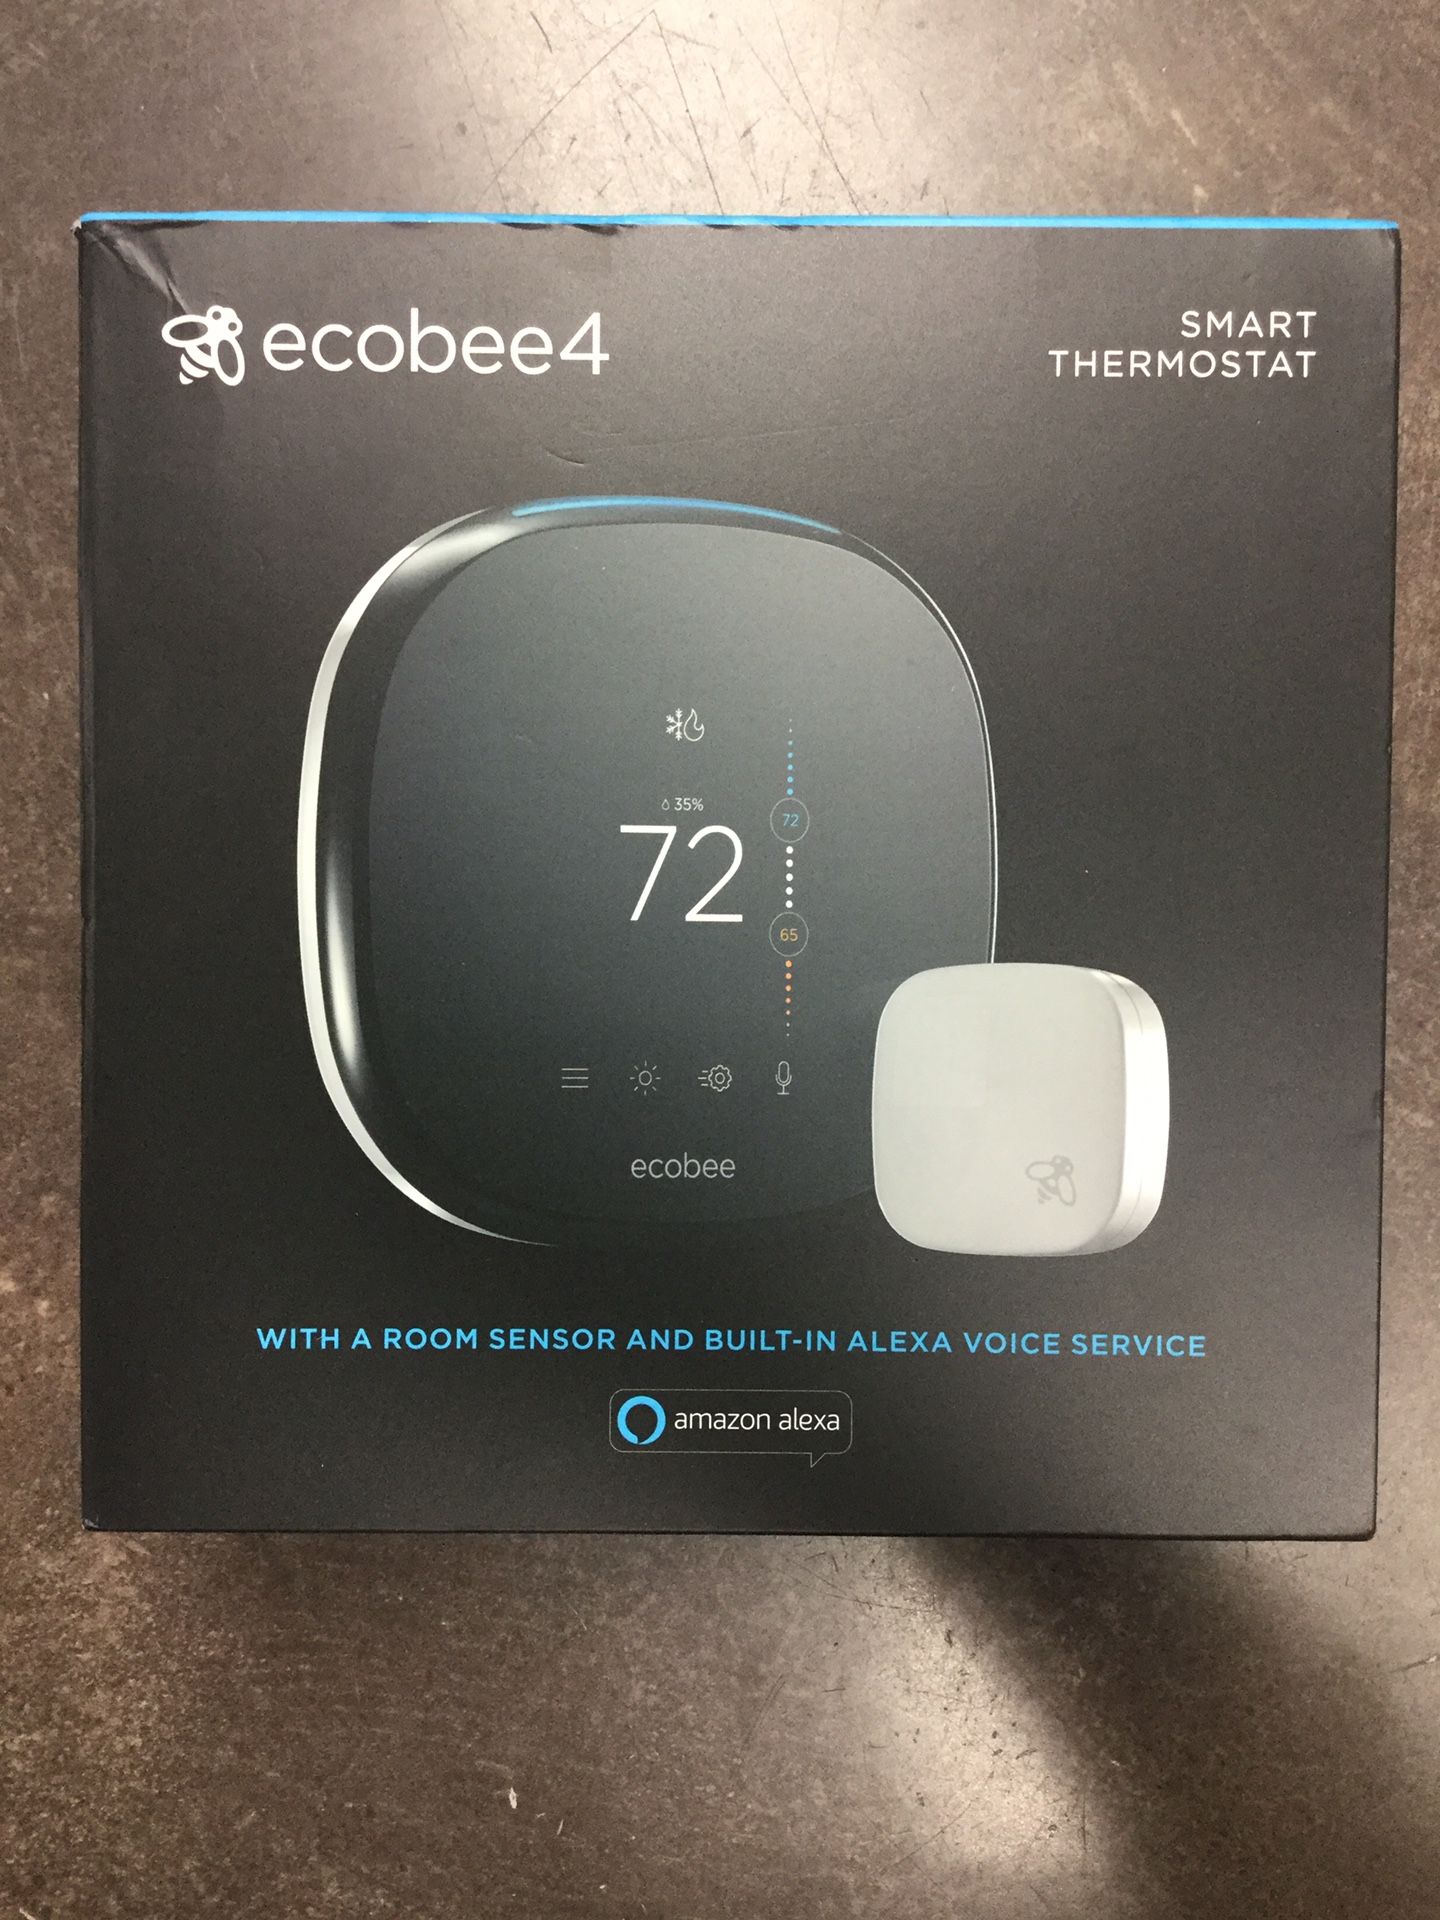 Ecobee 4 Smart Thermostat With Room Sensor and Built In Alexa Voice Service